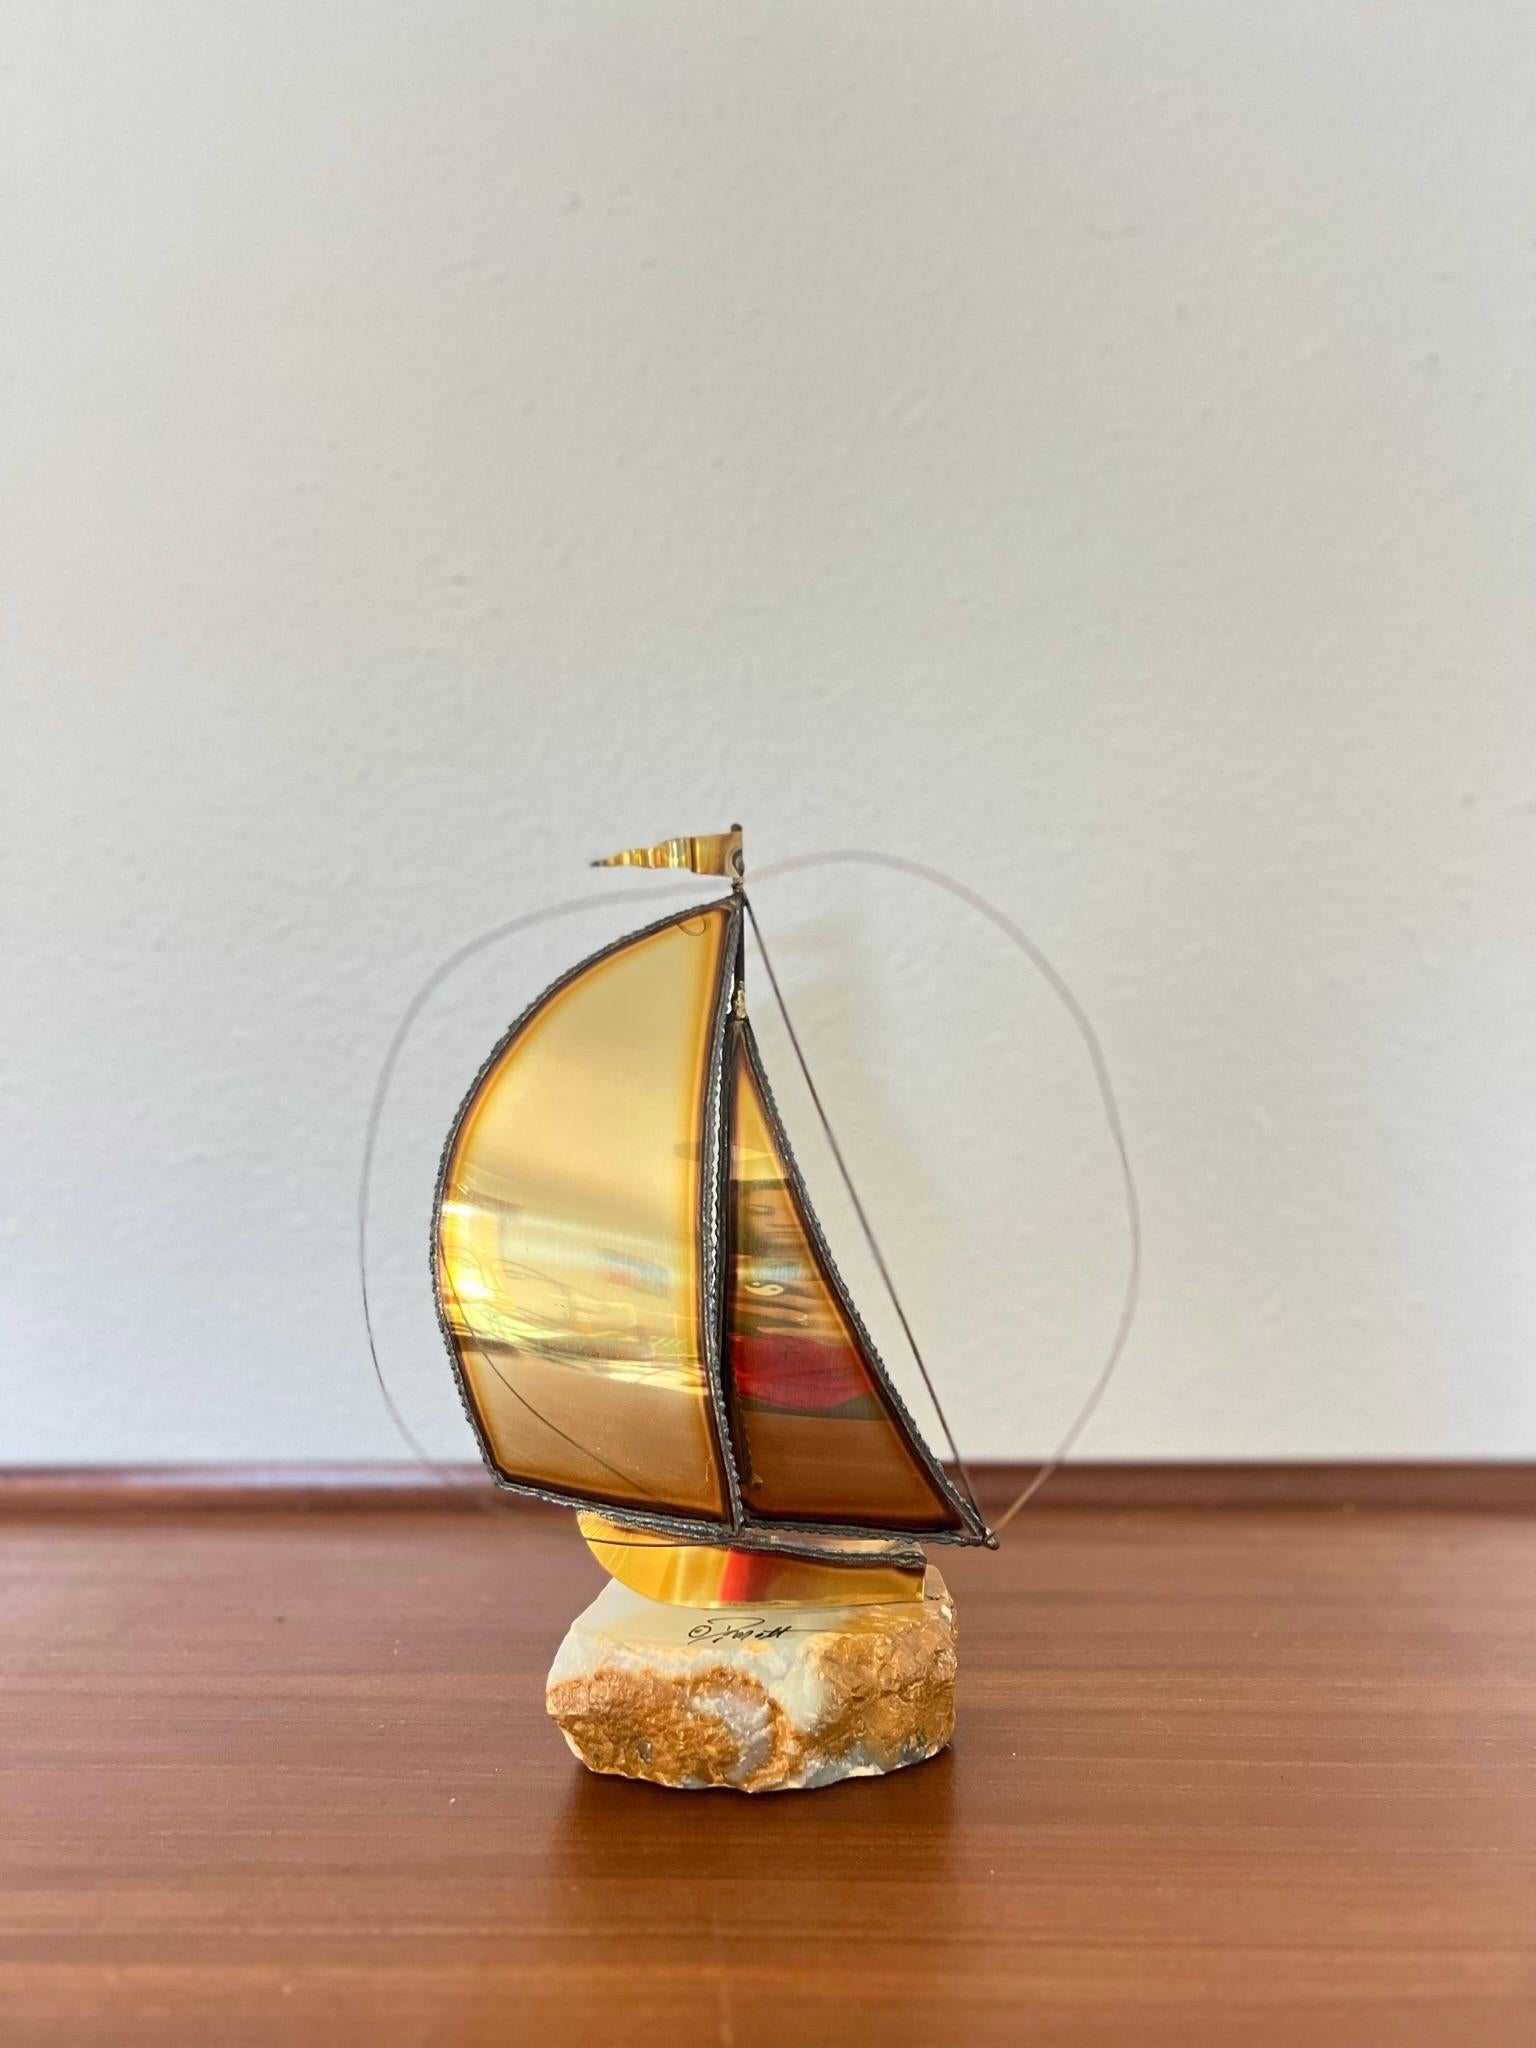 Beautiful brutalist sailboat sculpture of patinated brass sheets and copper wire on a white quartz base. Great movement is evoked in the sails at the pennant at the top mast.

Signed at the base 

The perfect addition to your home decor.